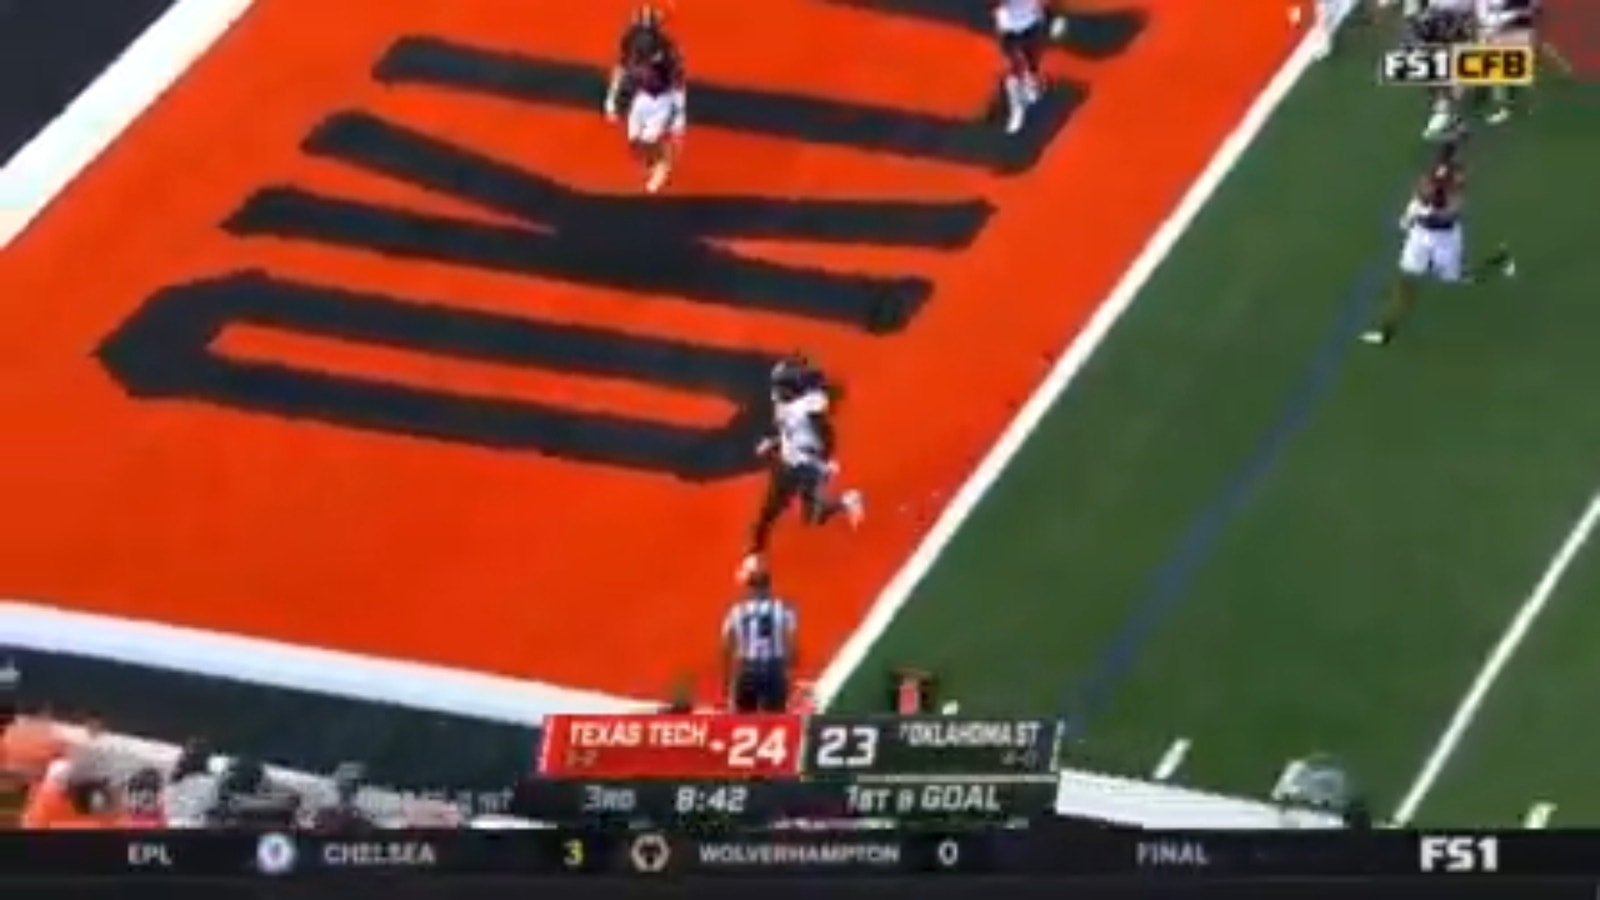 Sarodric Thompson finds hole in defense for 2-yard score